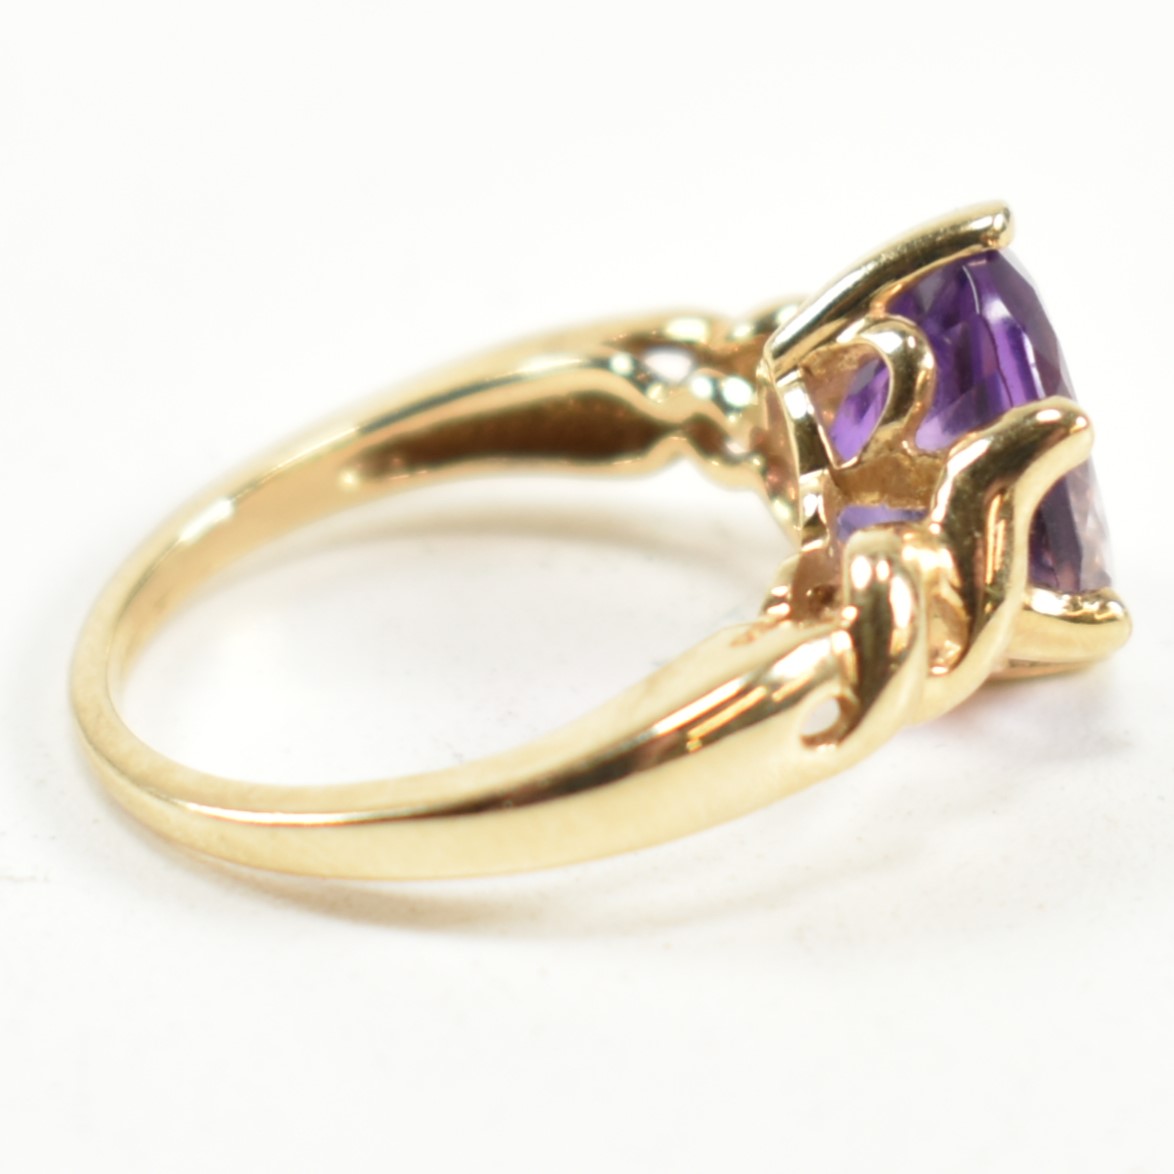 HALLMARKED 9CT GOLD & AMETHYST RING - Image 5 of 9